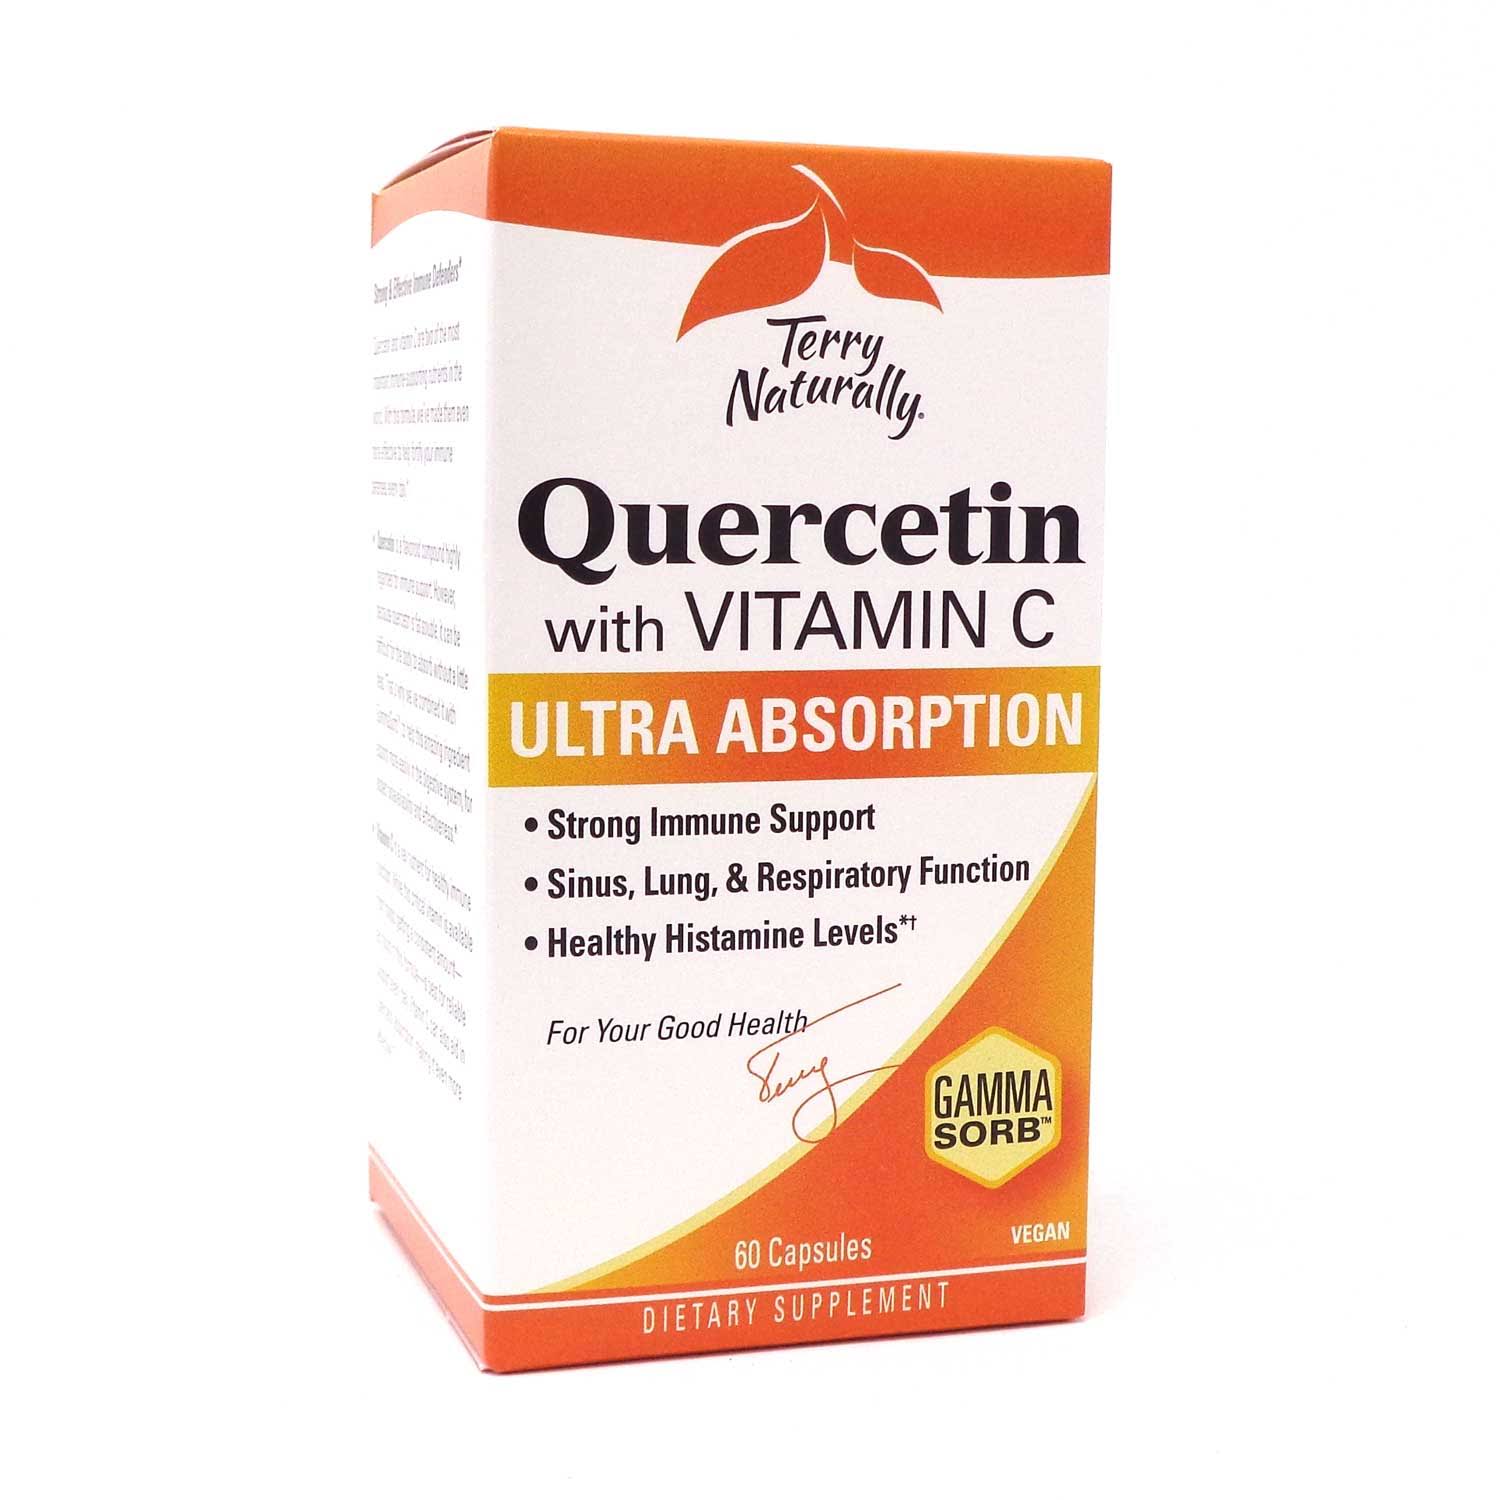 Terry Naturally Quercetin with Vitamin C - 60 Capsules